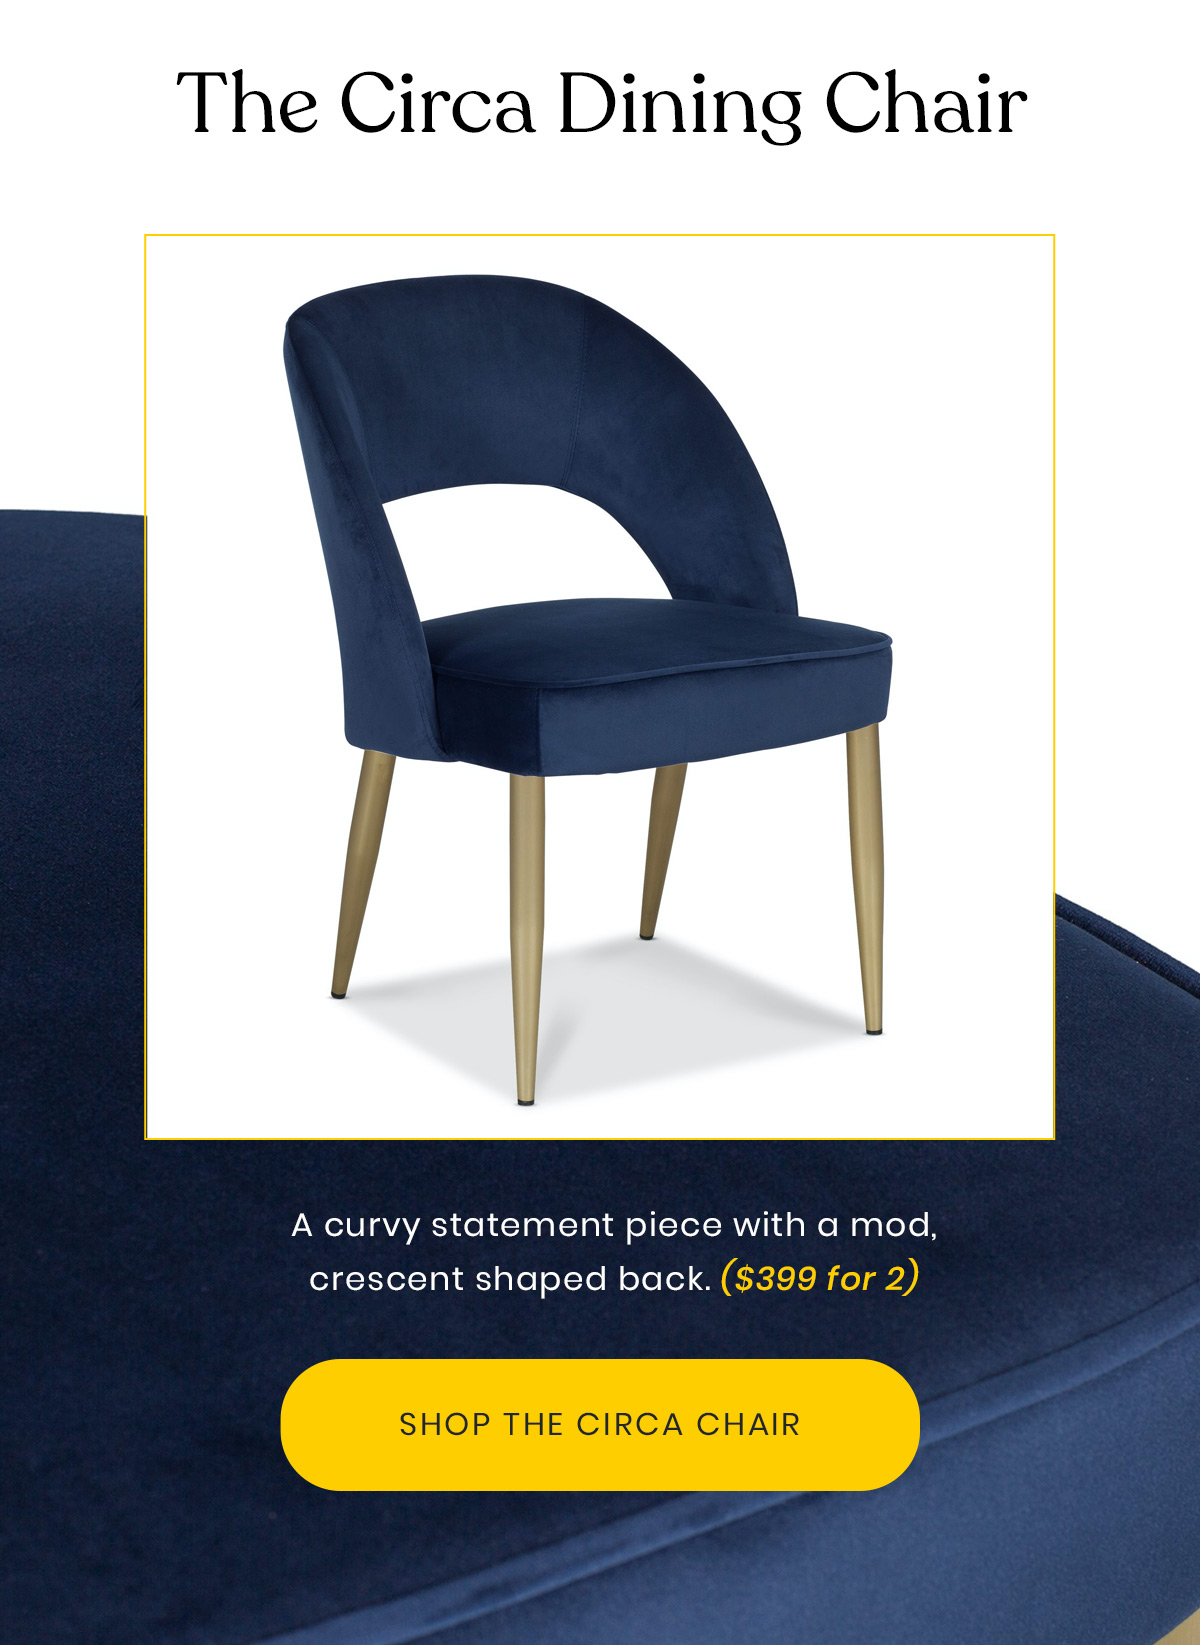 The Circa Dining Chair | A curvy statement piece with a mod, crescent shaped back. ($399 for 2)